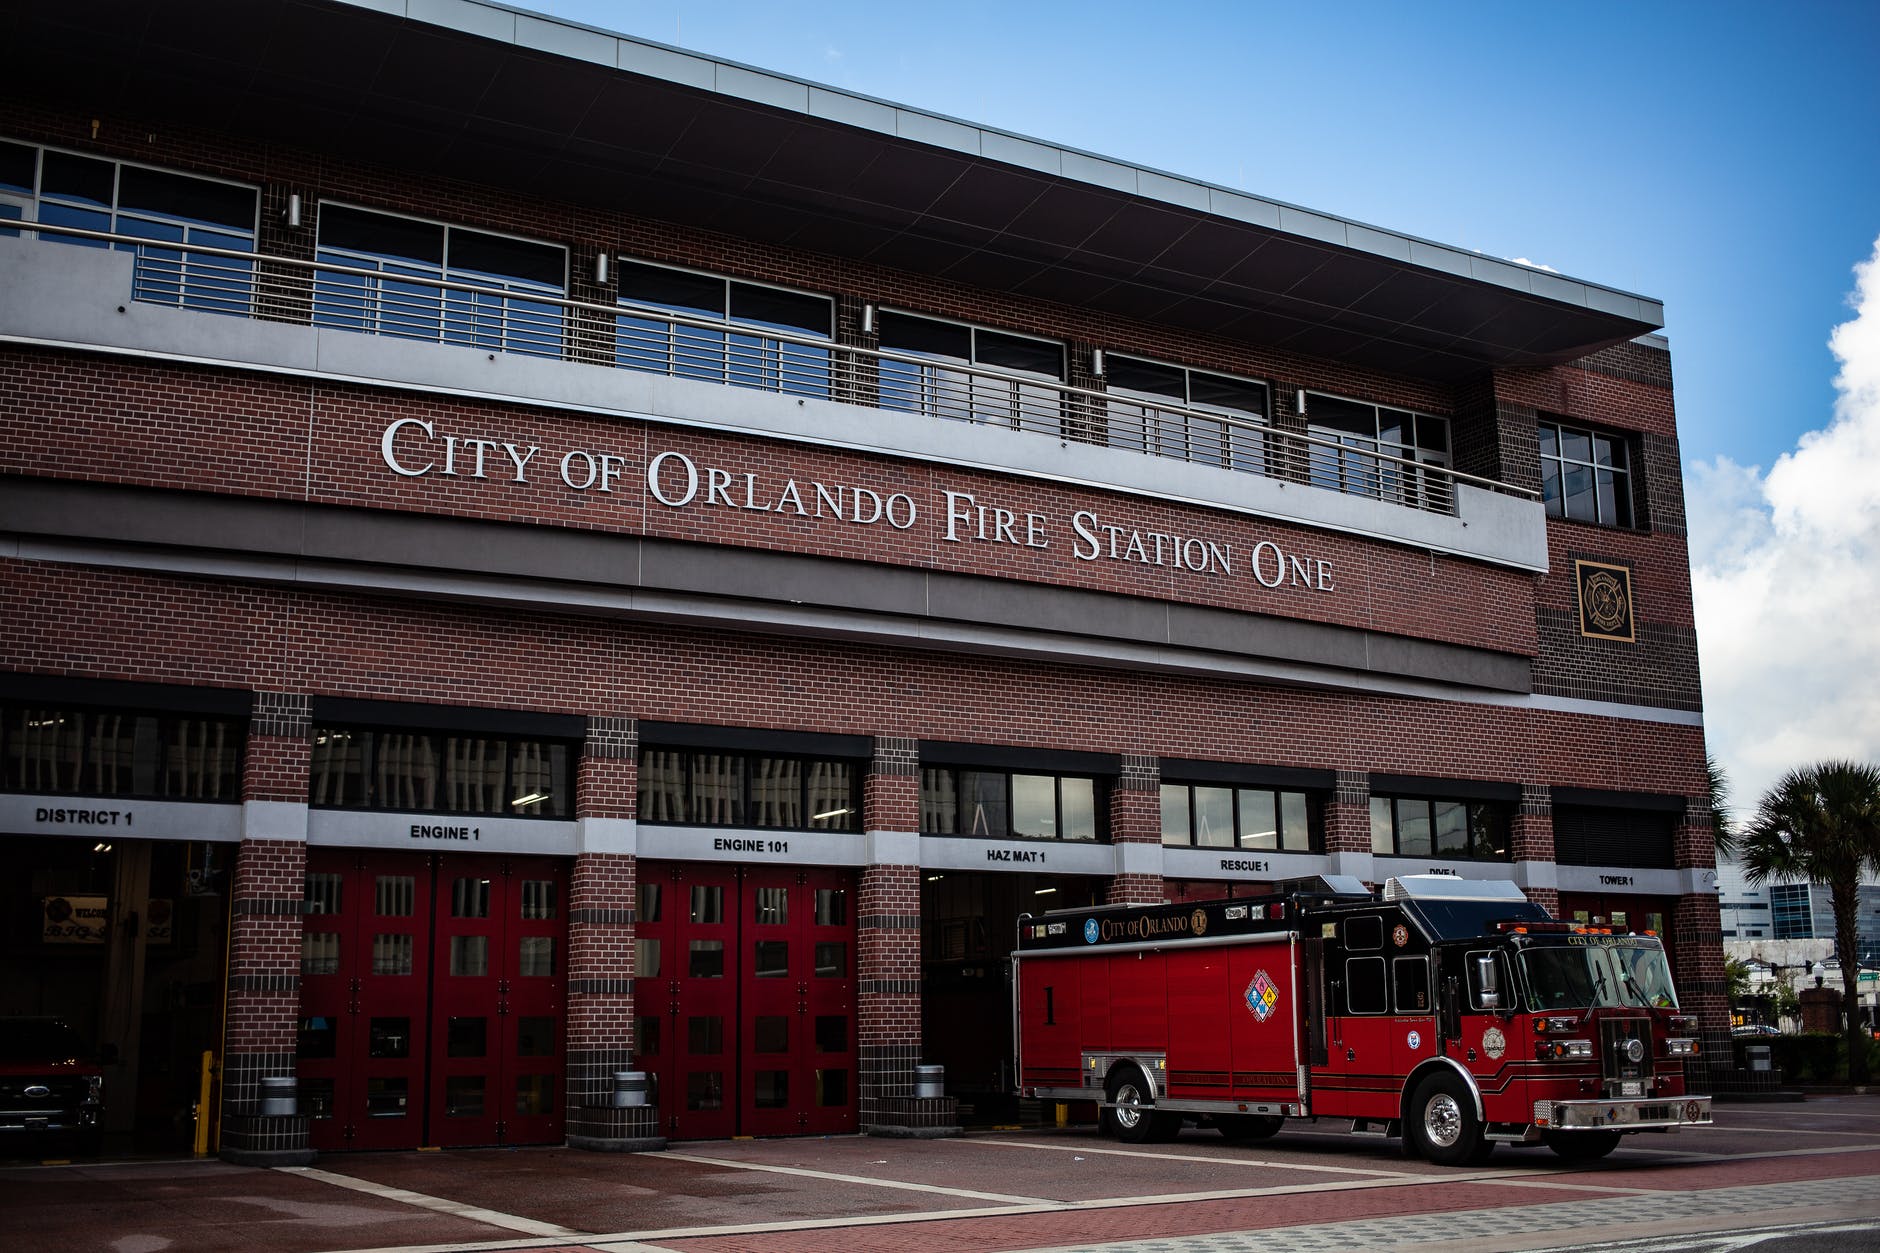 City of Orlando Fire Station One